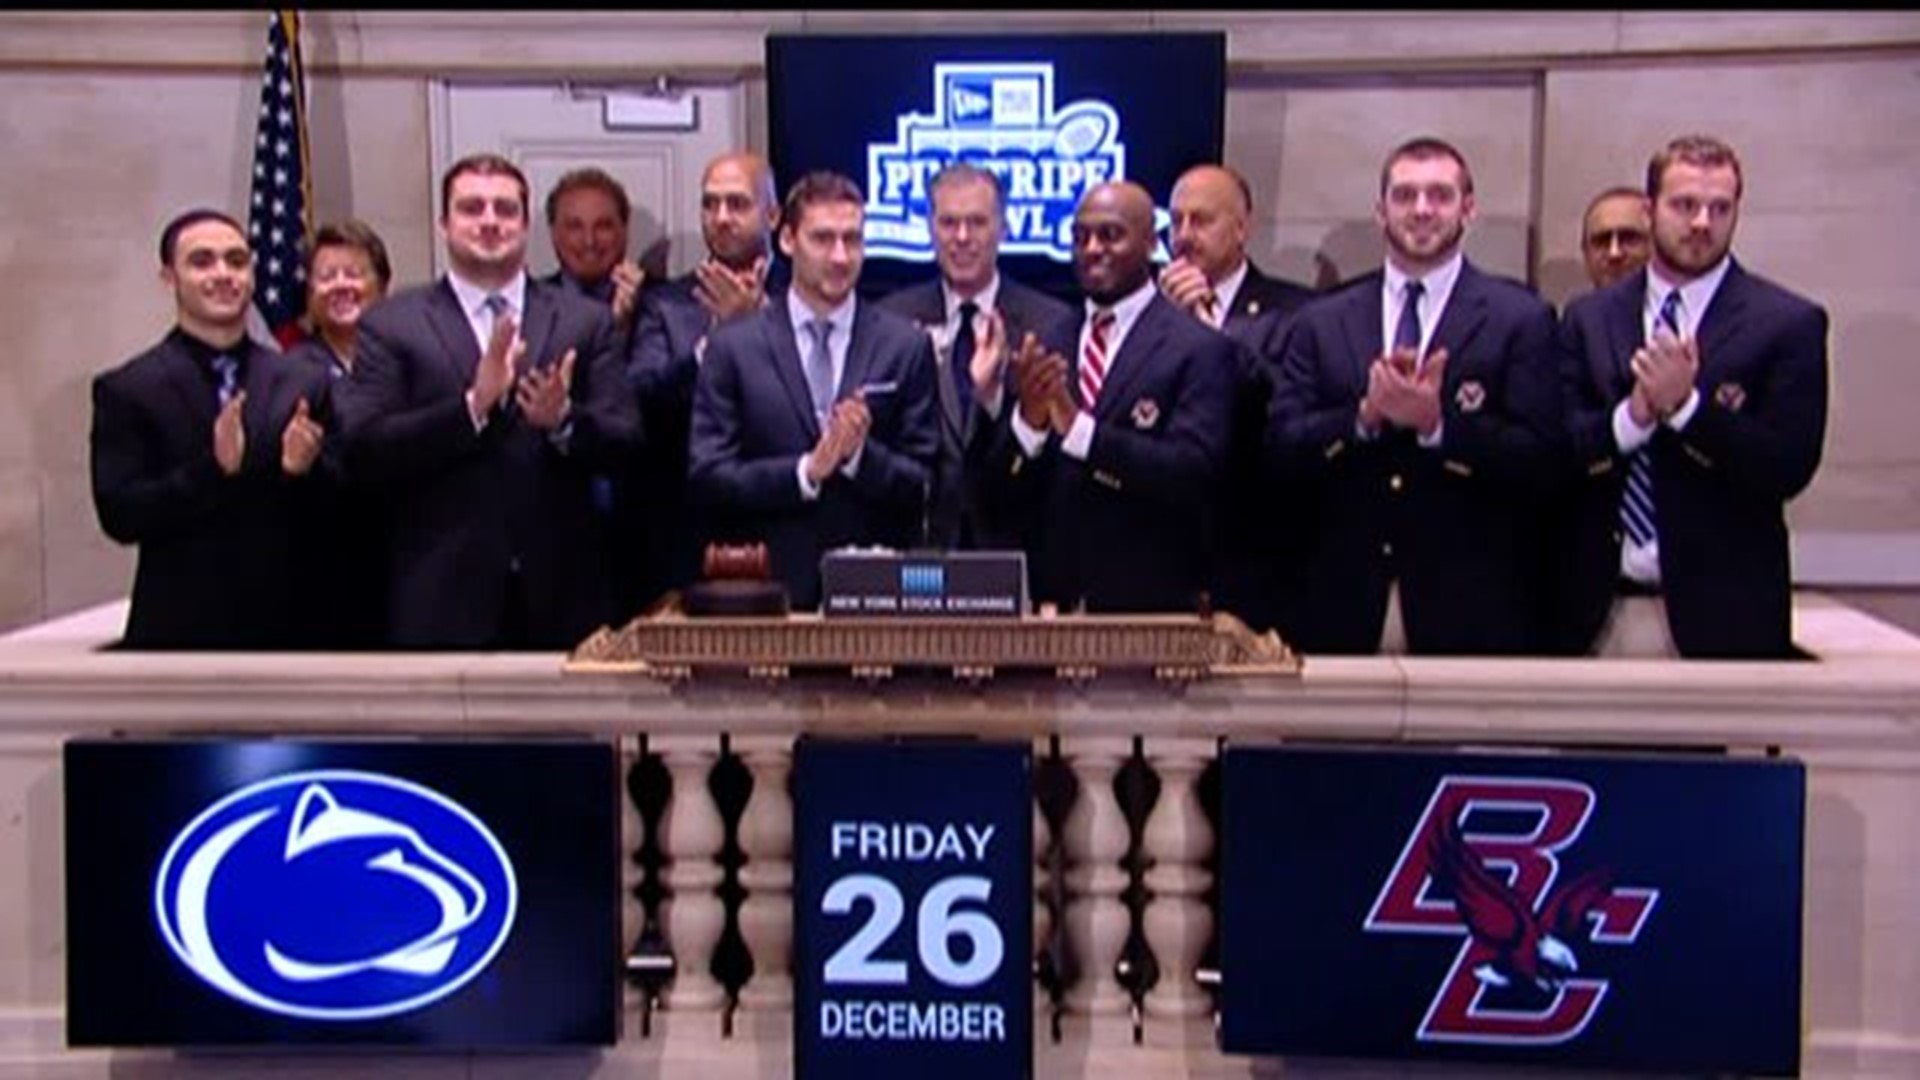 Penn State football players ring the opening bell at NYSE with chants of "We are, Penn State"